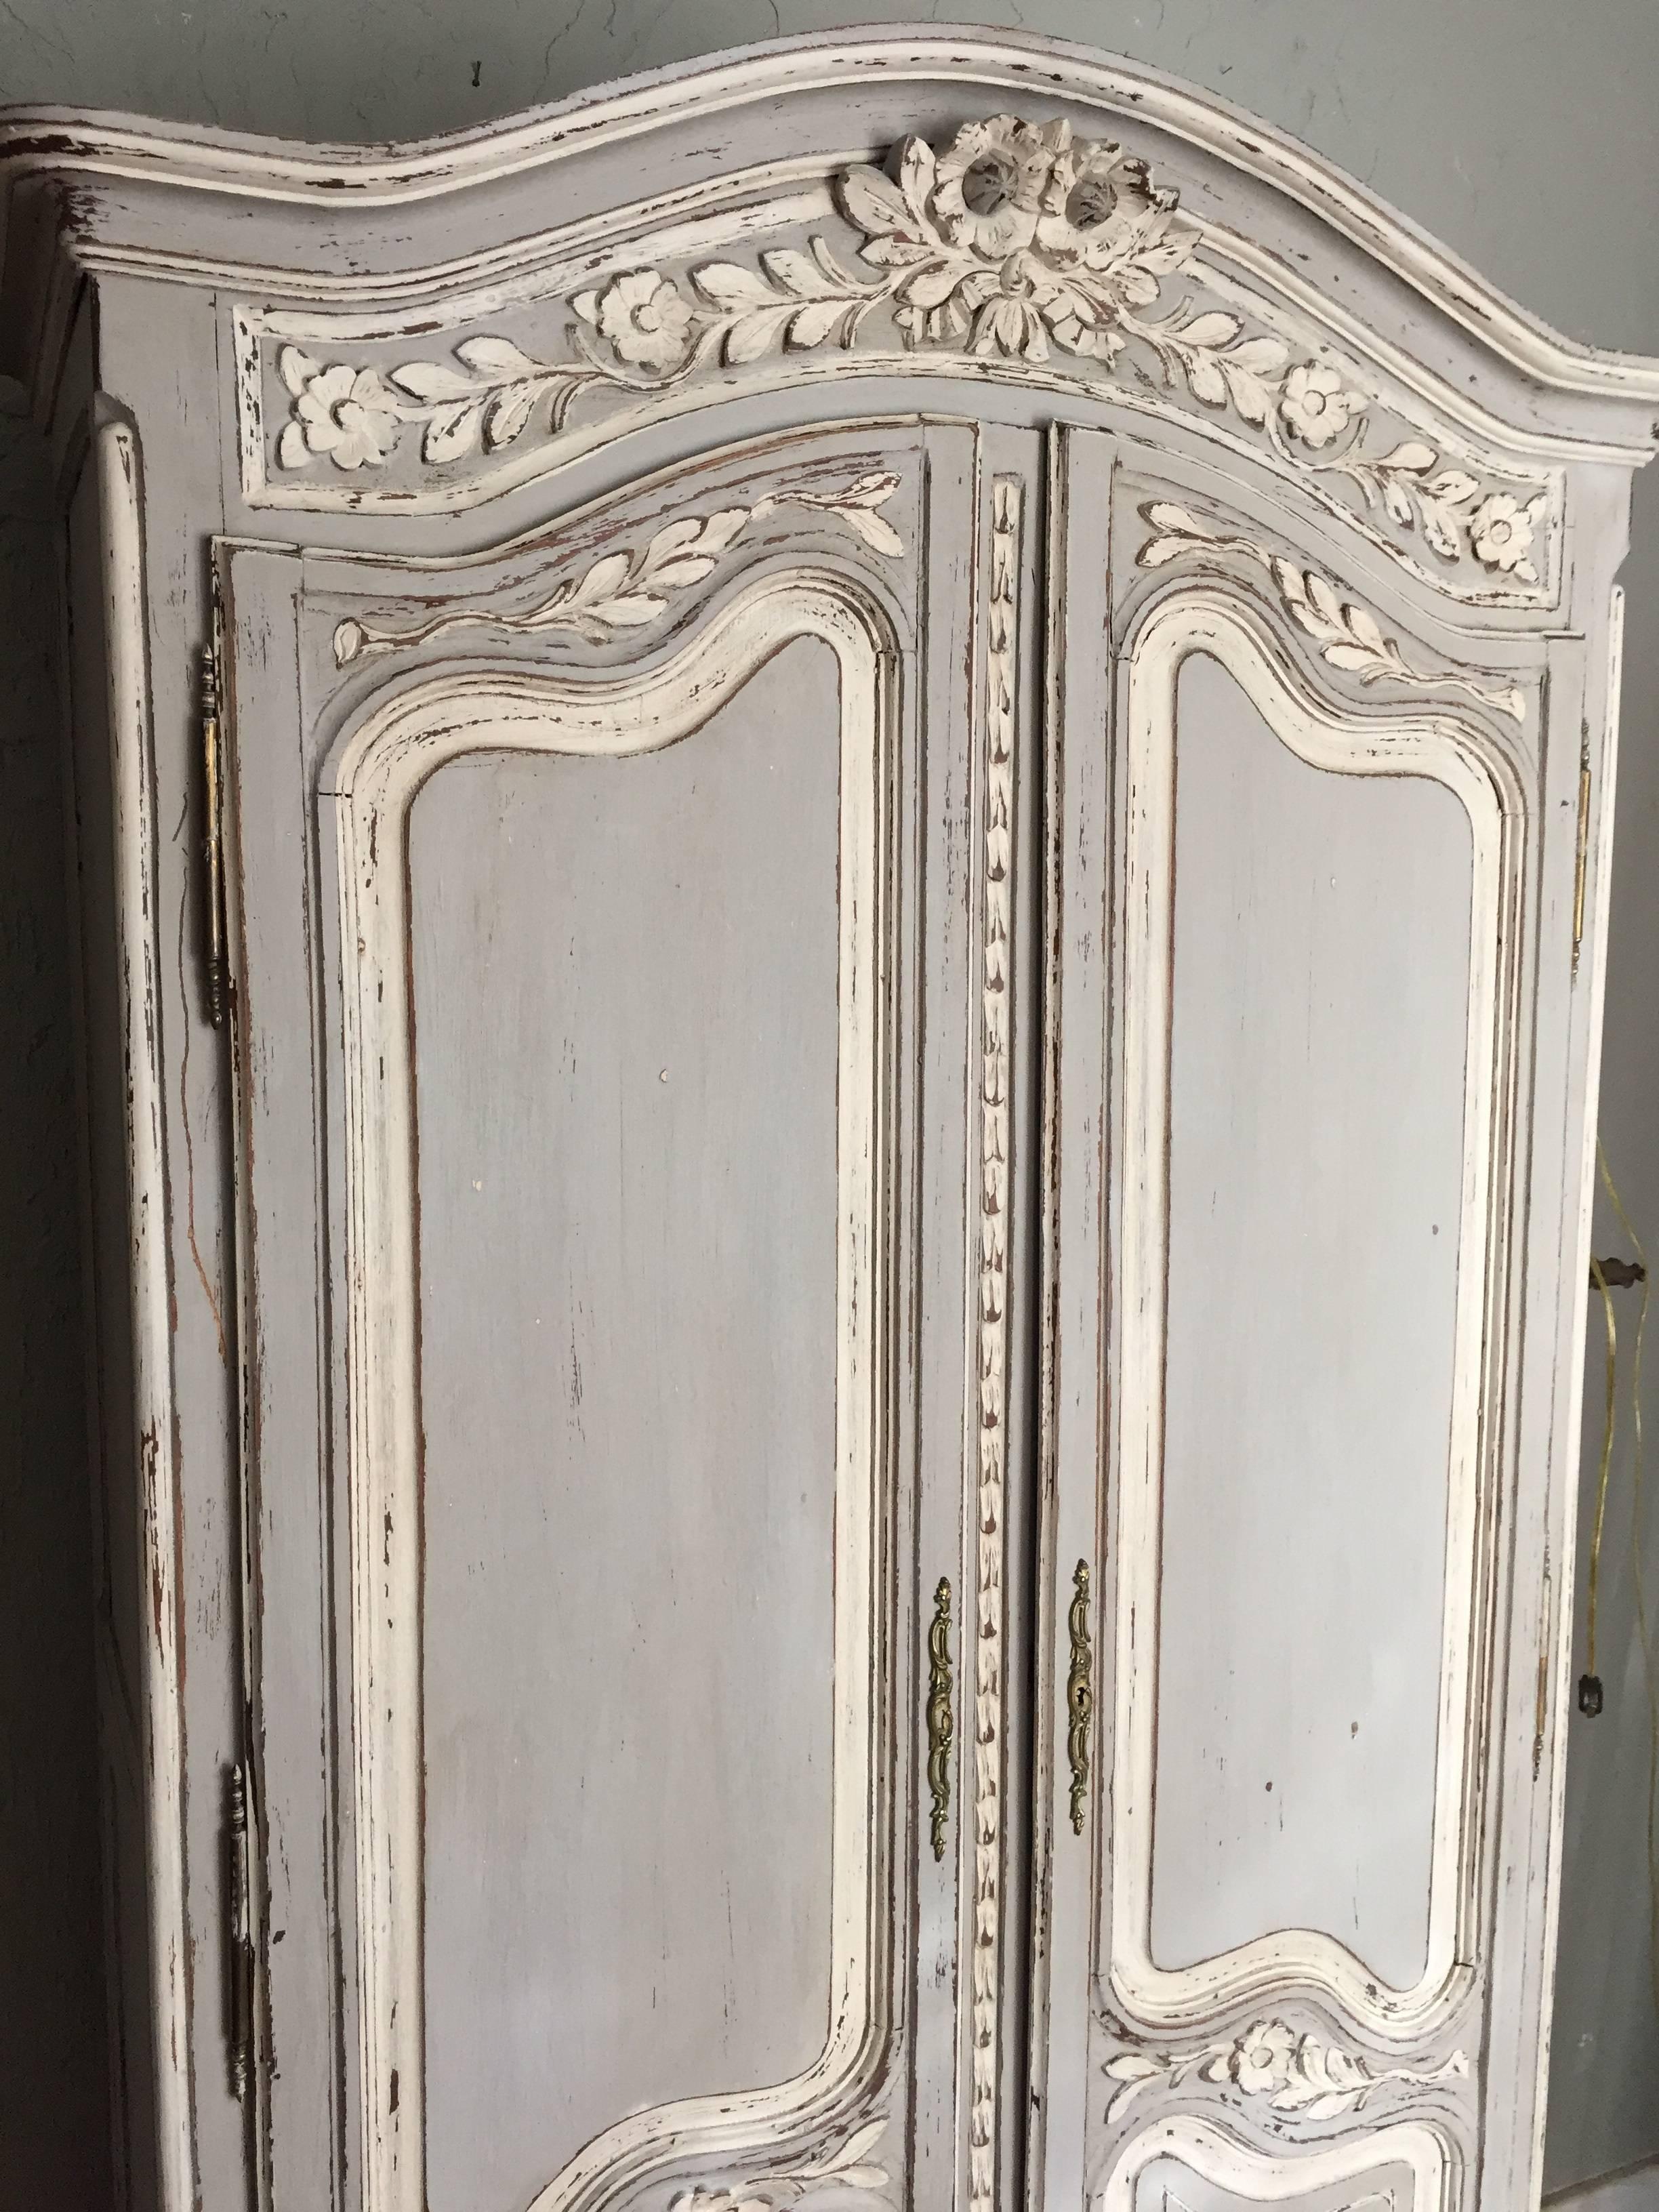 This is a very nice painted French armoire I purchased in France. It dates to the late 1800s. It is in very good condition and the smaller size makes it practical for many spaces.